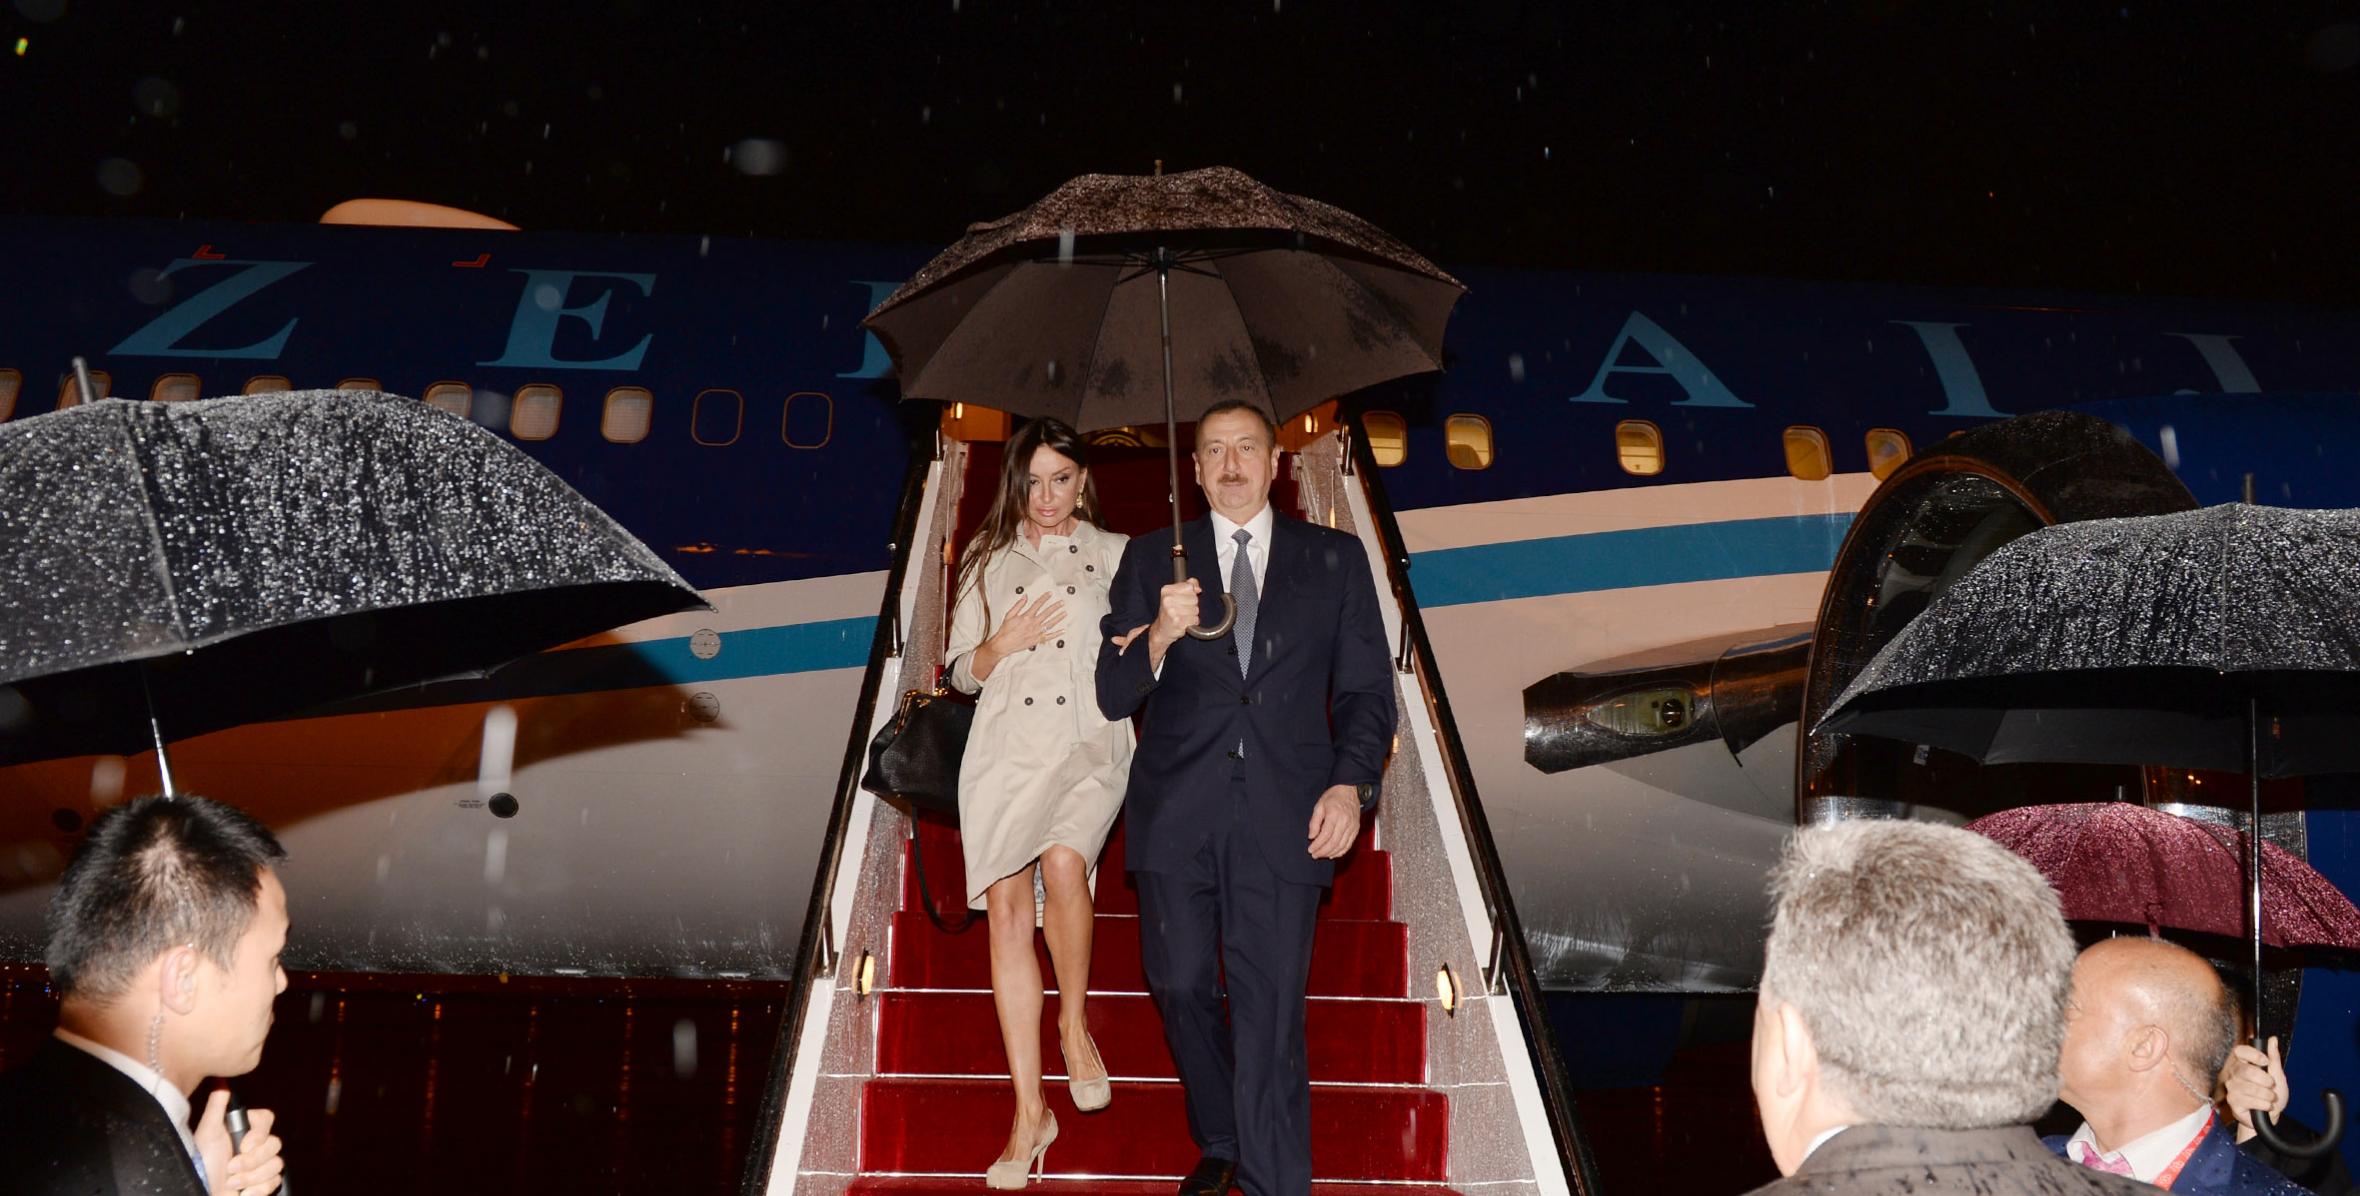 Ilham Aliyev arrived in China on a working visit